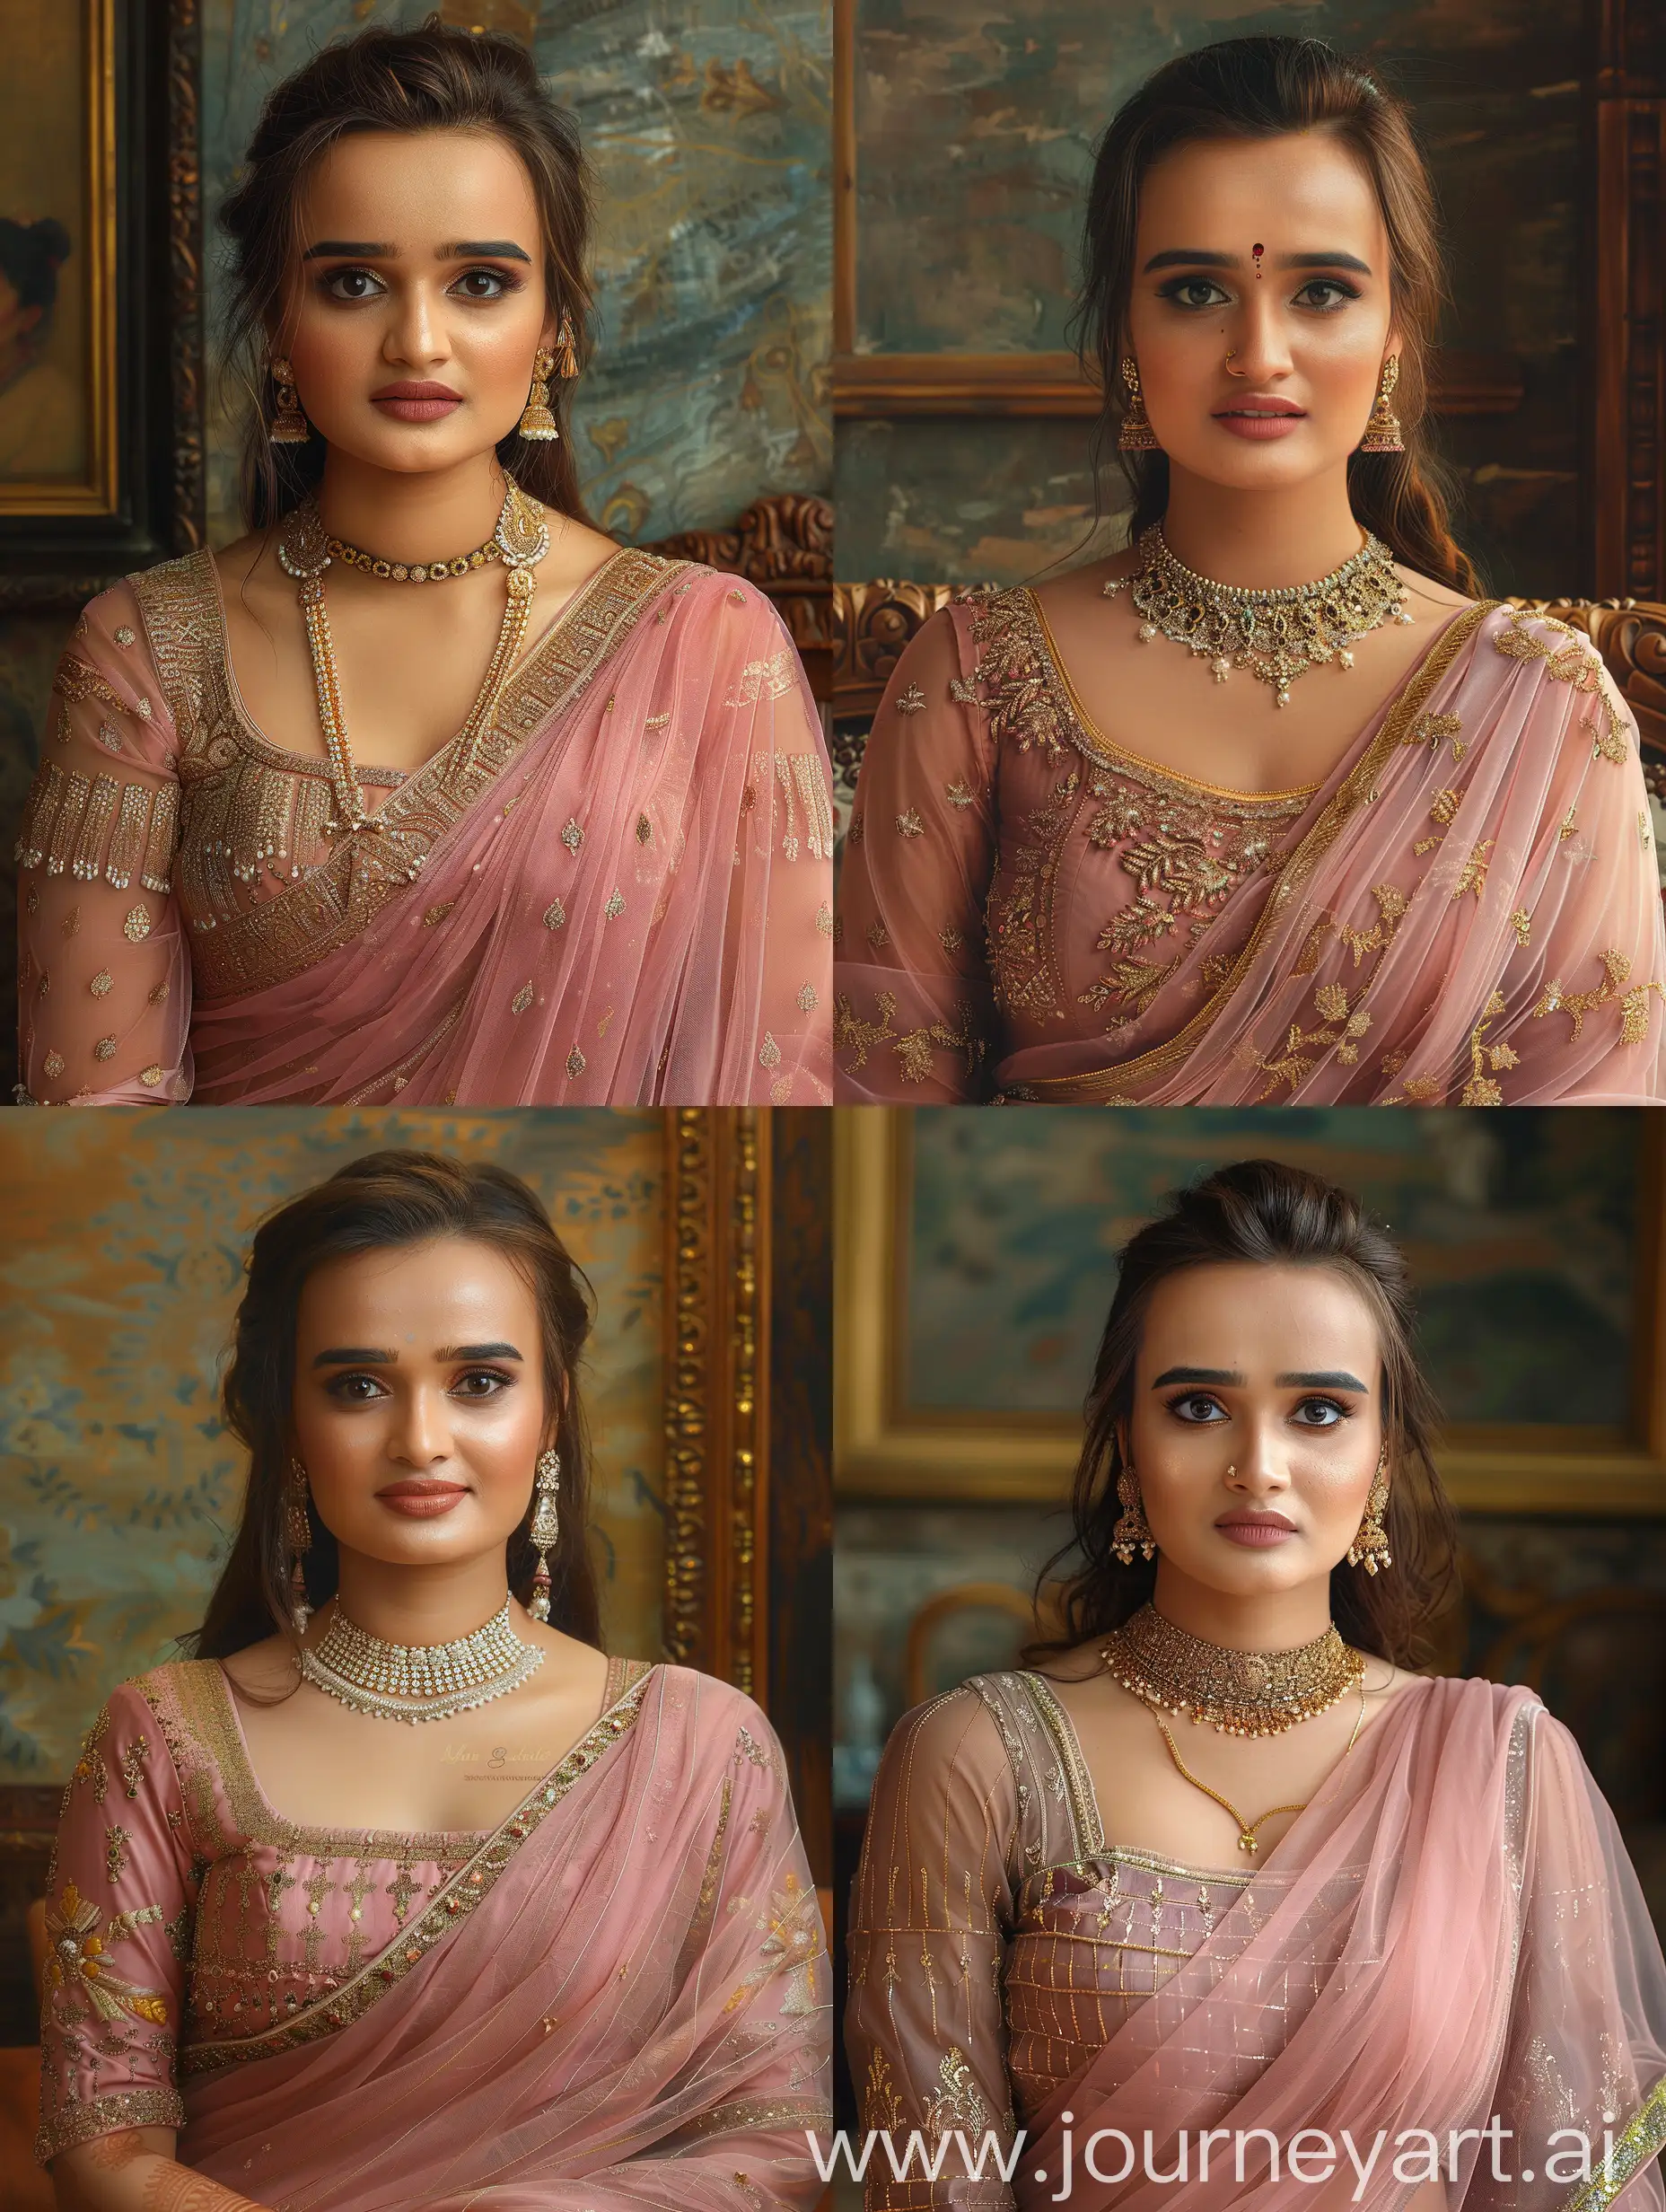 A majestic portrait of a woman adorned in an exquisite Indian sari, vibrant colors, gold embroidery, intricate patterns, in the style of Raja Ravi Varma's oil paintings, traditional jewelry, elegance, with an aura of royalty --cref https://cdn.discordapp.com/attachments/1123949216025280582/1230210805228638318/IMG_20240313_124108.jpg?ex=66327e18&is=66200918&hm=d3c441869601d60f8d550804c926e5918a54cad0a3719c076b6379cf982c577b& --cw 100 --ar 3:4 --s 650 --v 6